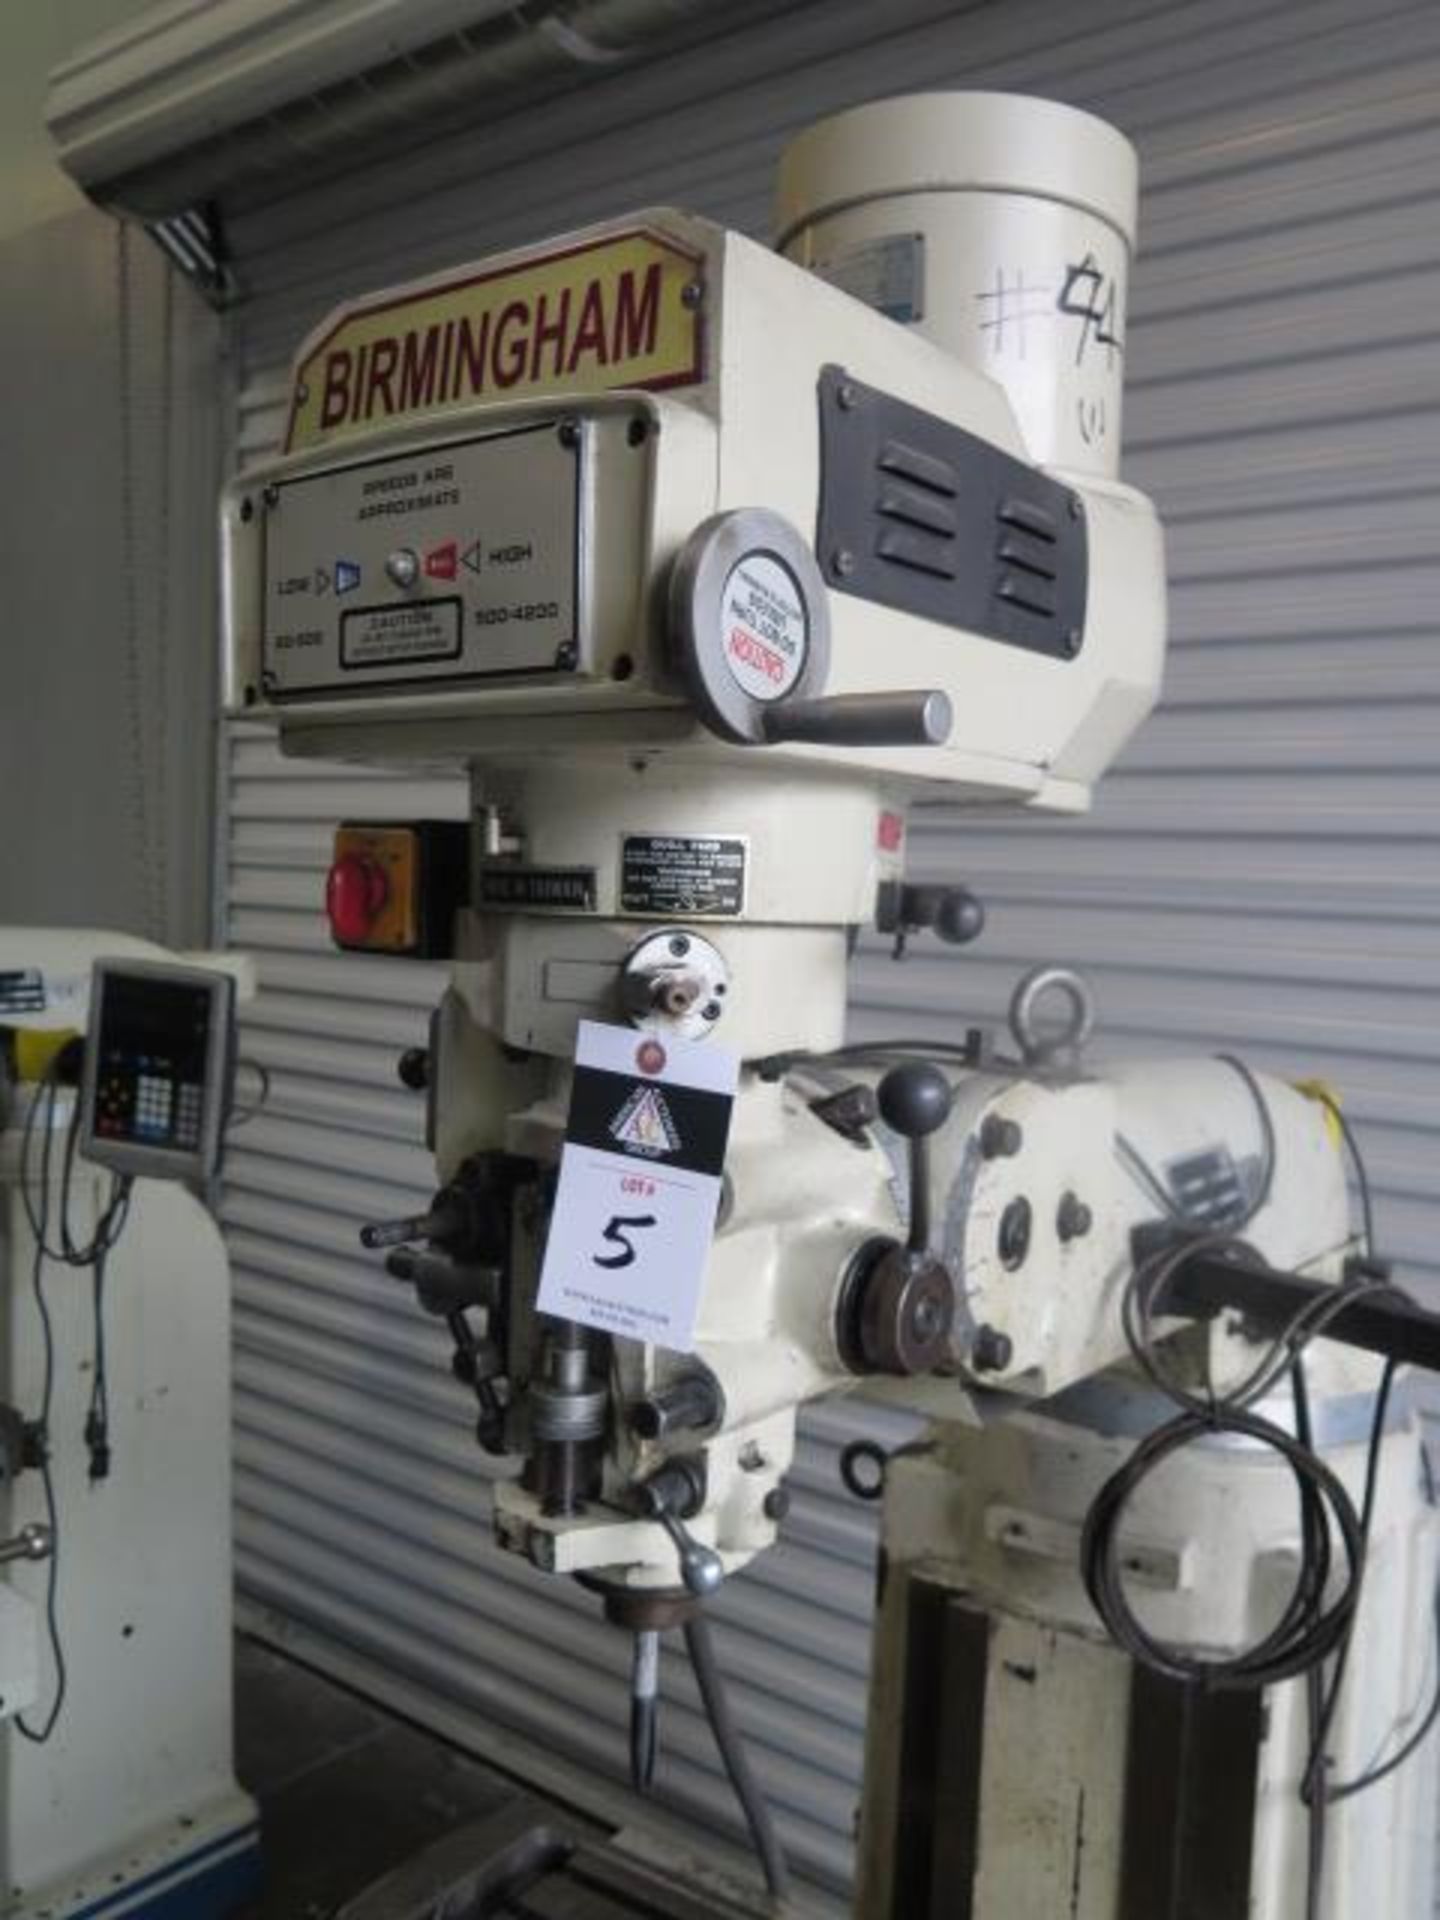 2006 Birmingham X6323A Vertical Mill s/n 063416 w/ Newall C80 Programmable DRO, 3Hp Motor,SOLD AS IS - Image 4 of 11